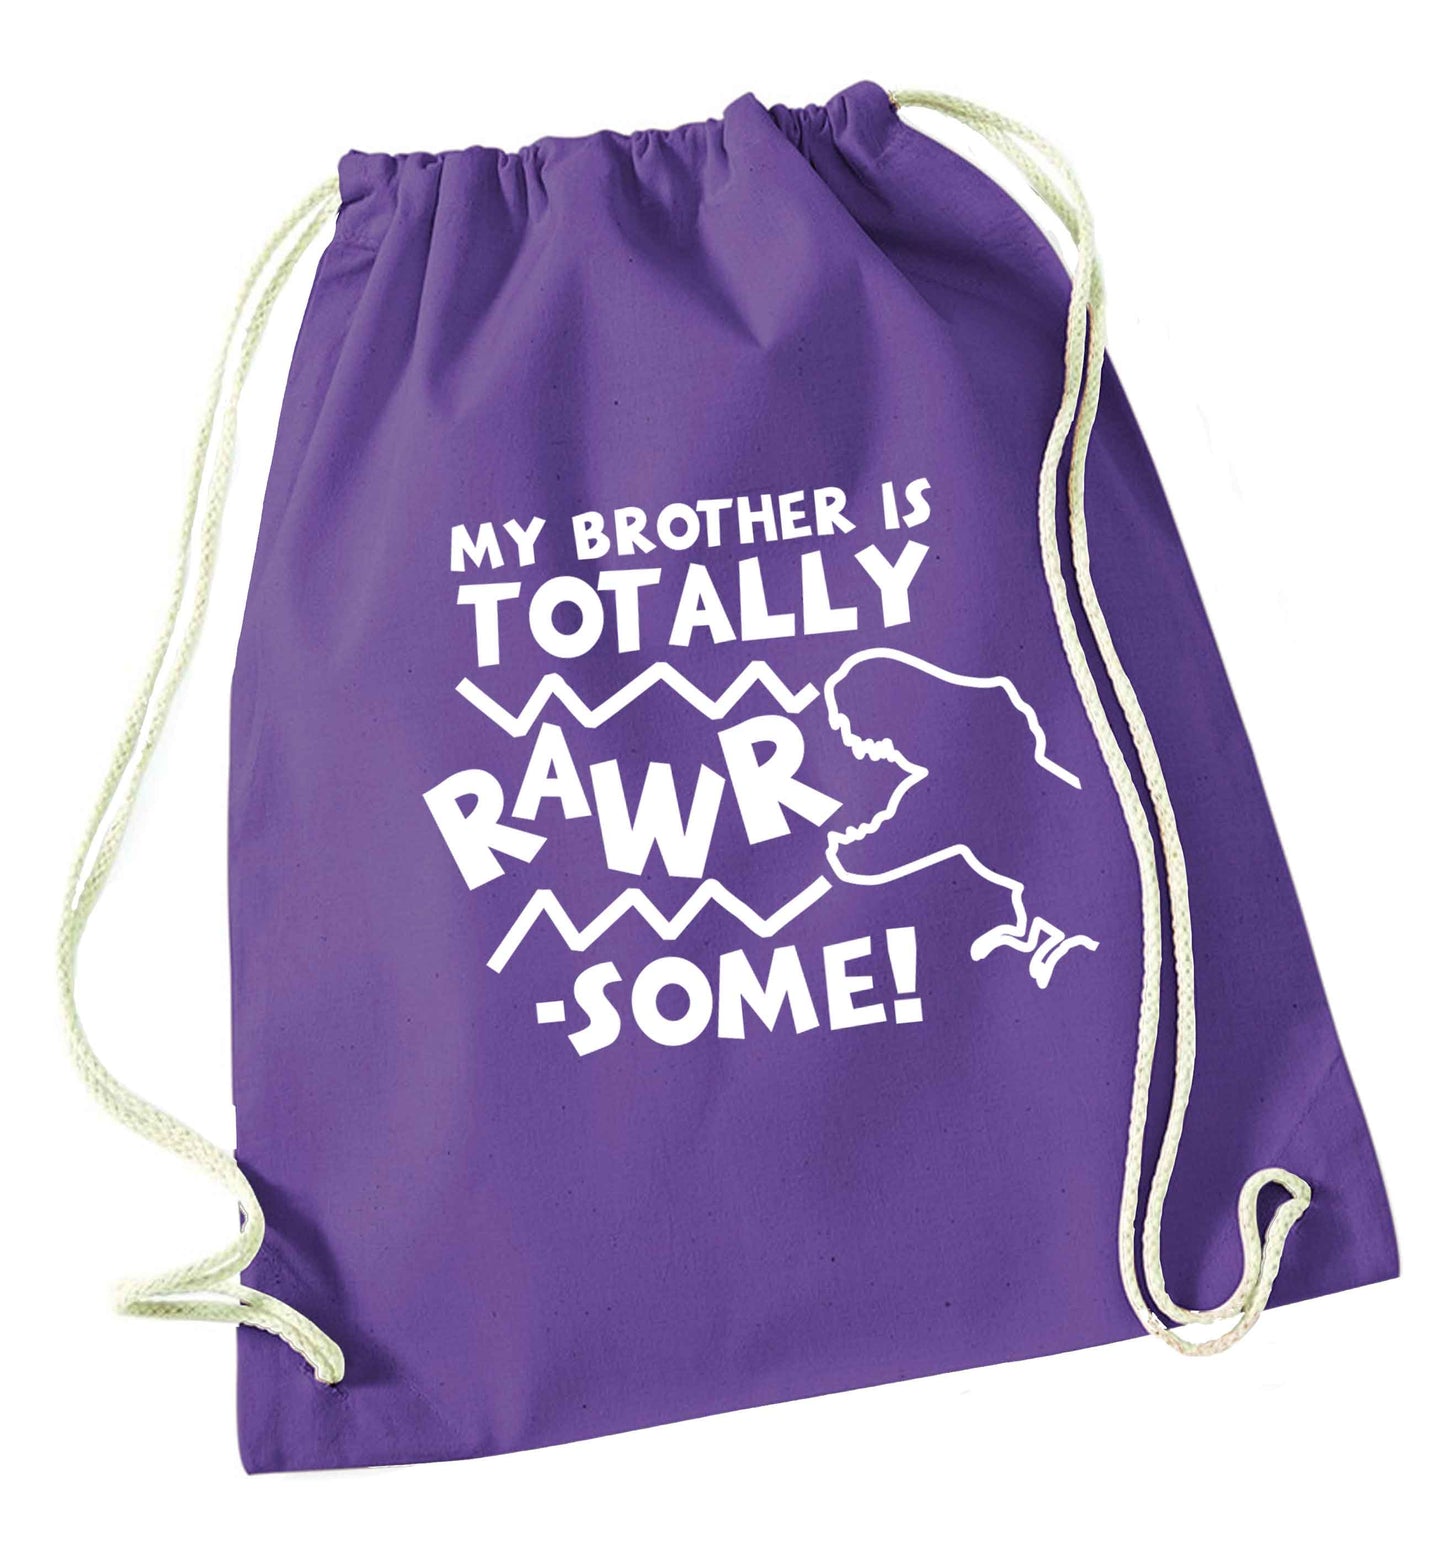 My brother is totally rawrsome purple drawstring bag